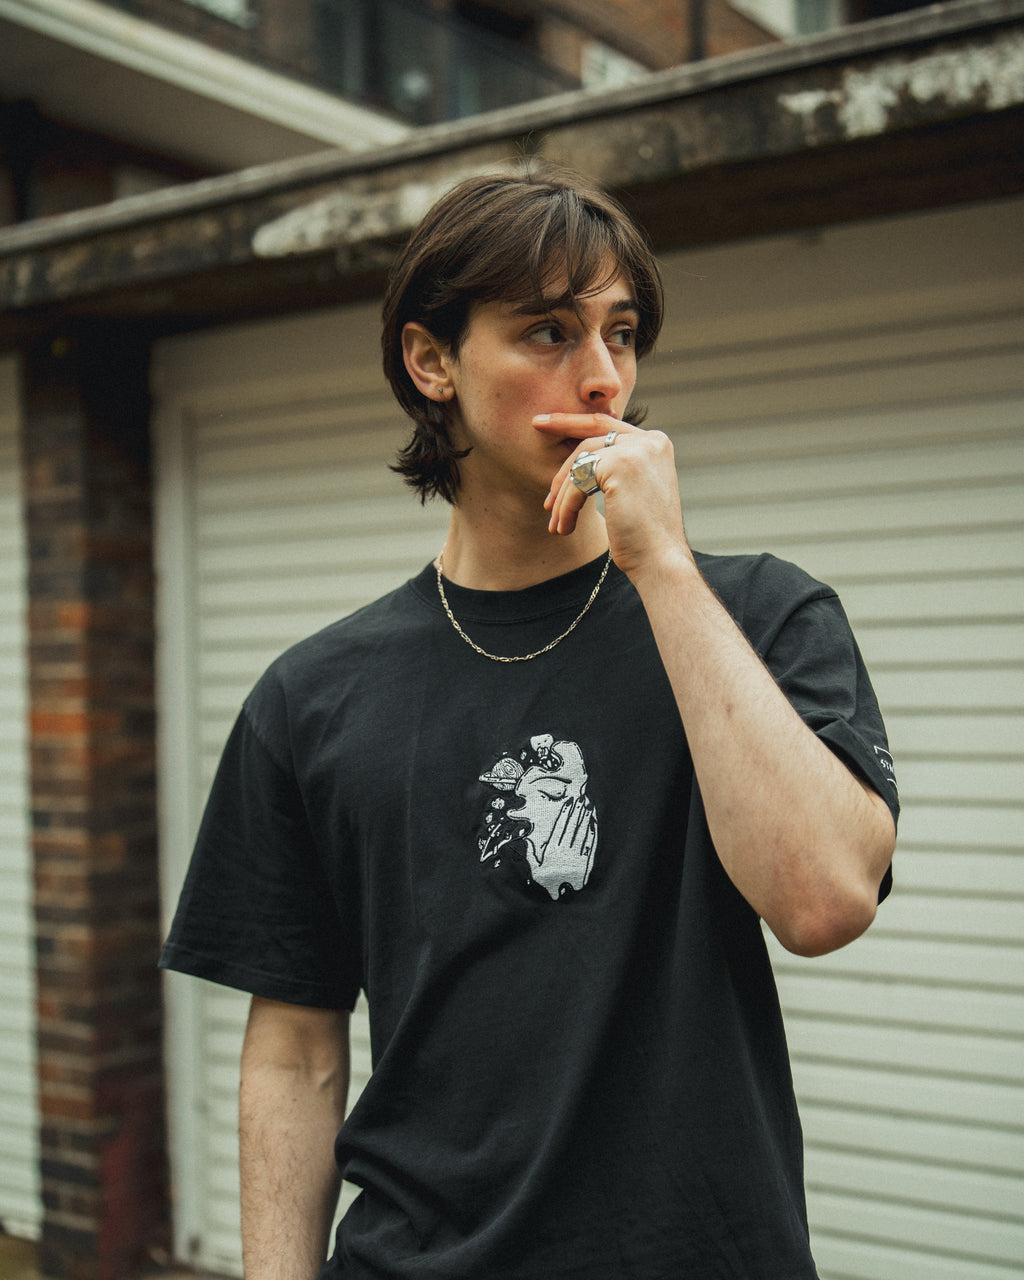 Oversized black STMNT Streetwear t-shirt with embroidered skull and floral design, worn by a young person with short, dark hair standing in a city setting.